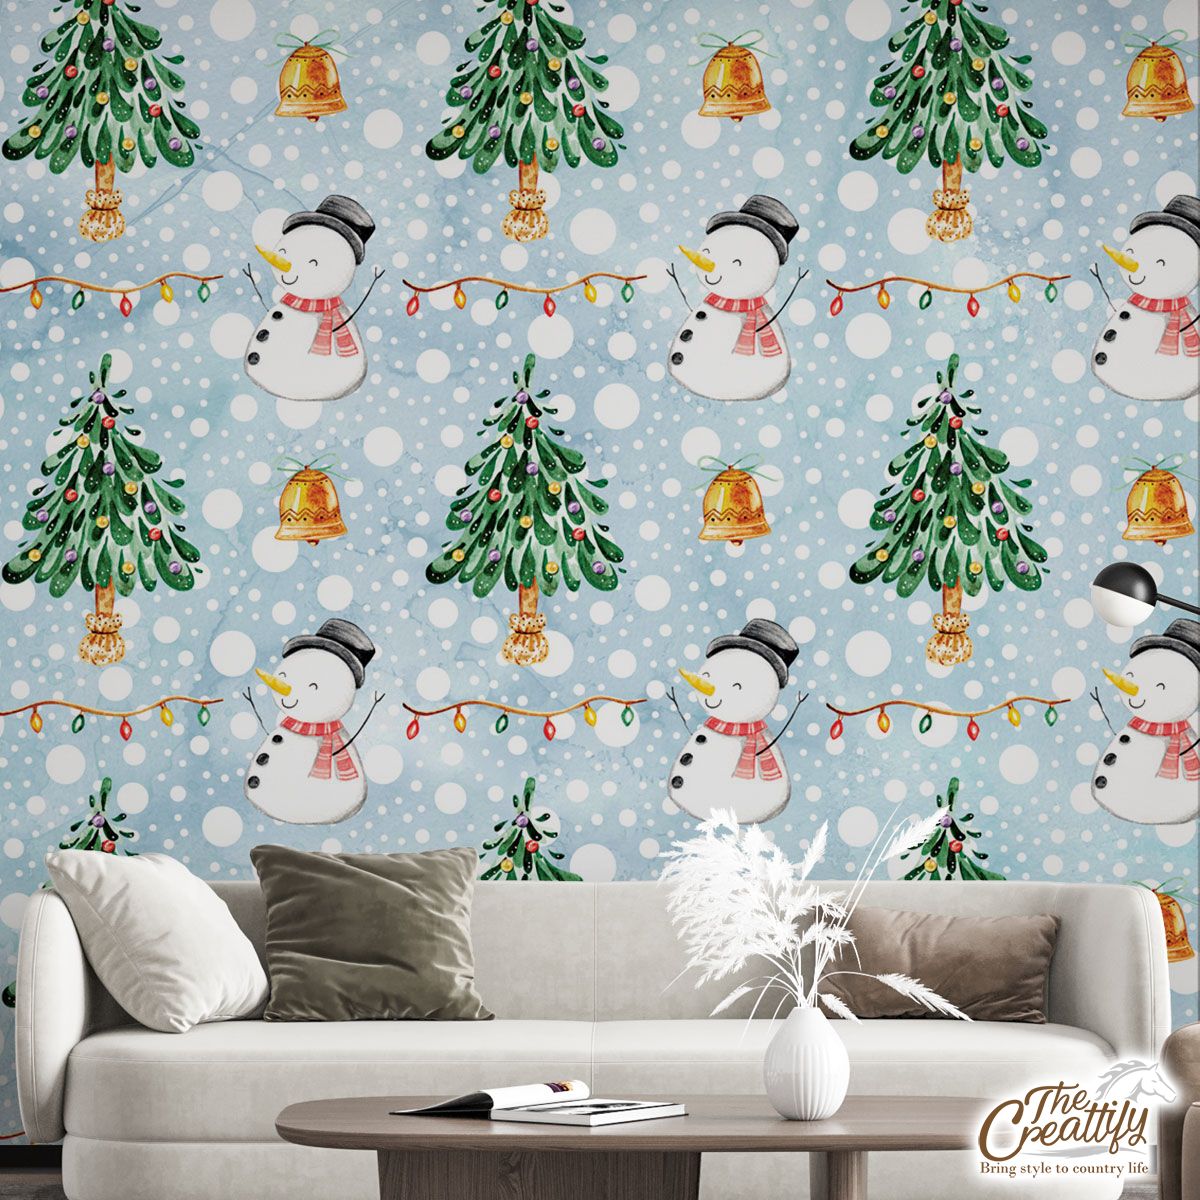 Snowman And Christmas Tree On Snowflake Background Wall Mural